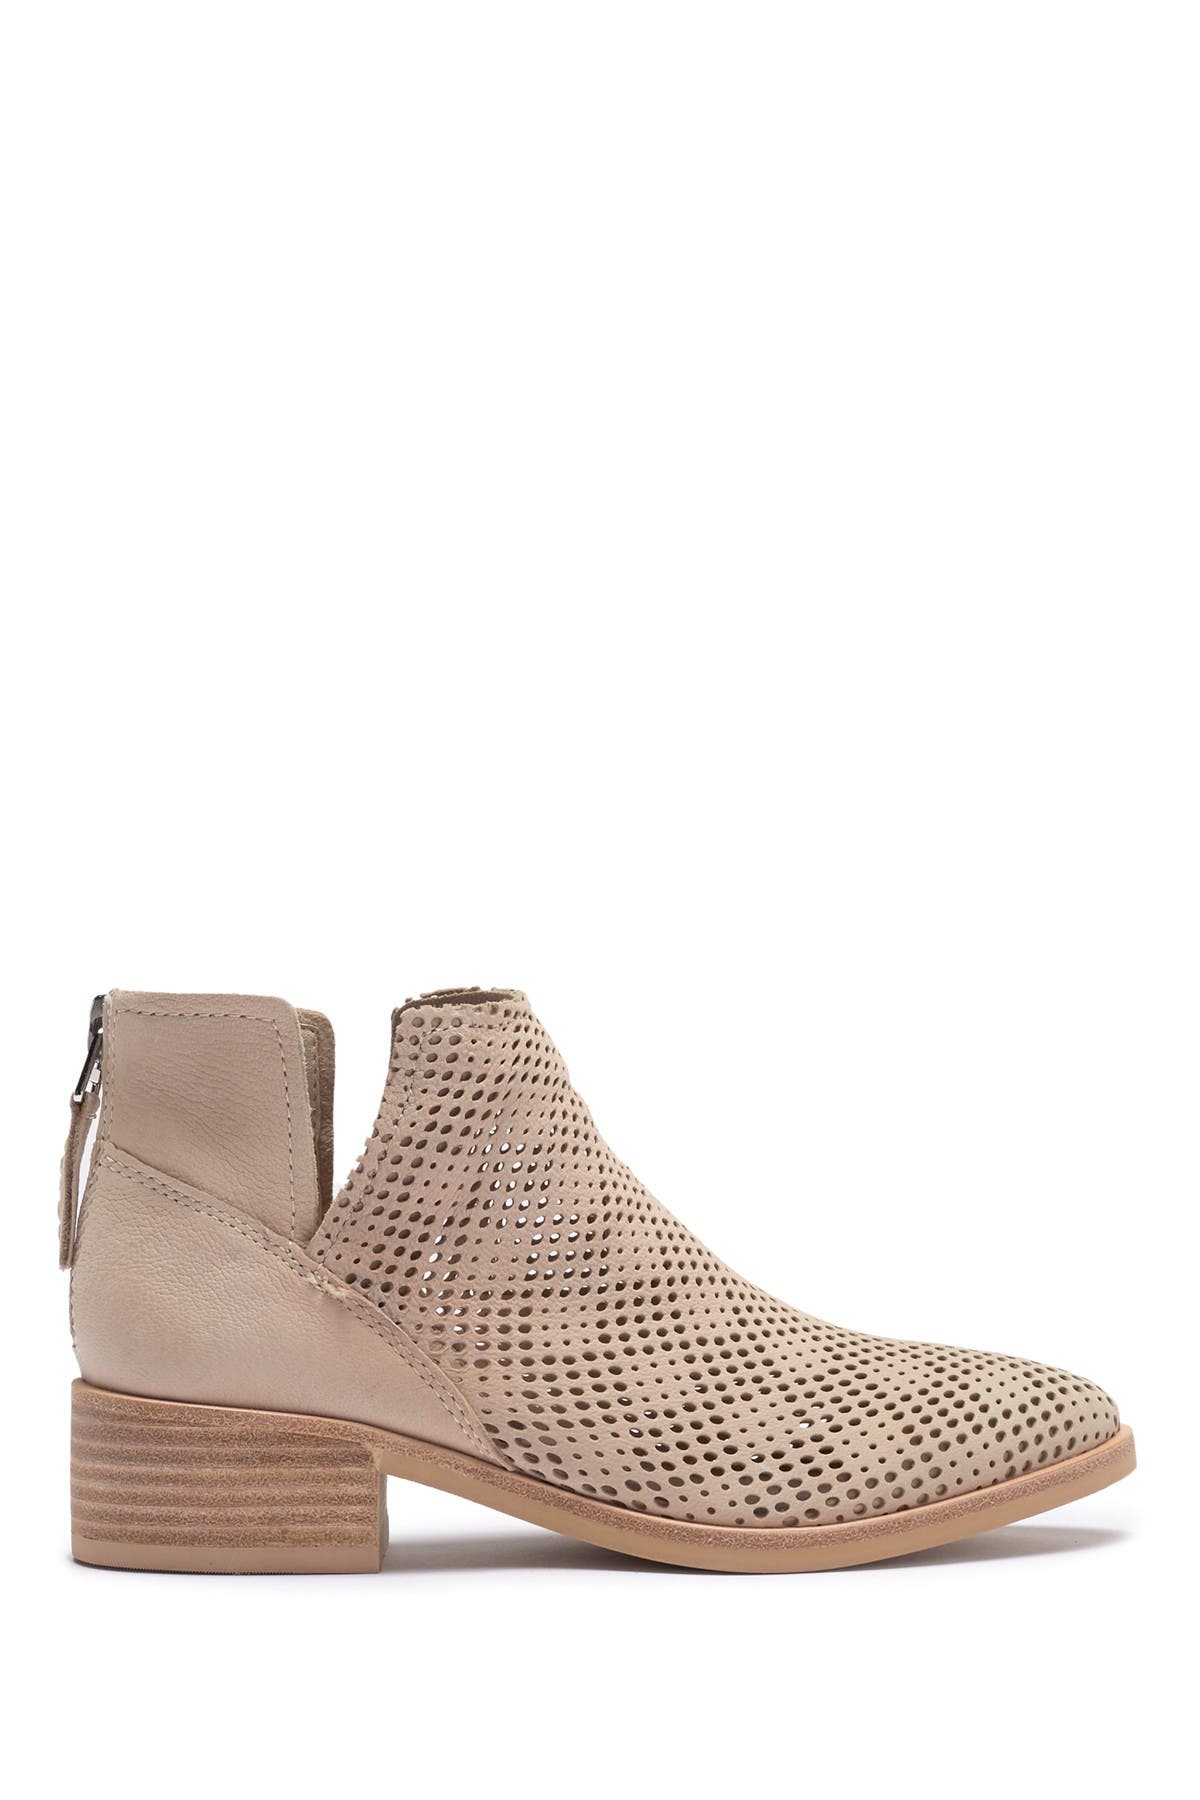 dolce vita tommi perforated bootie